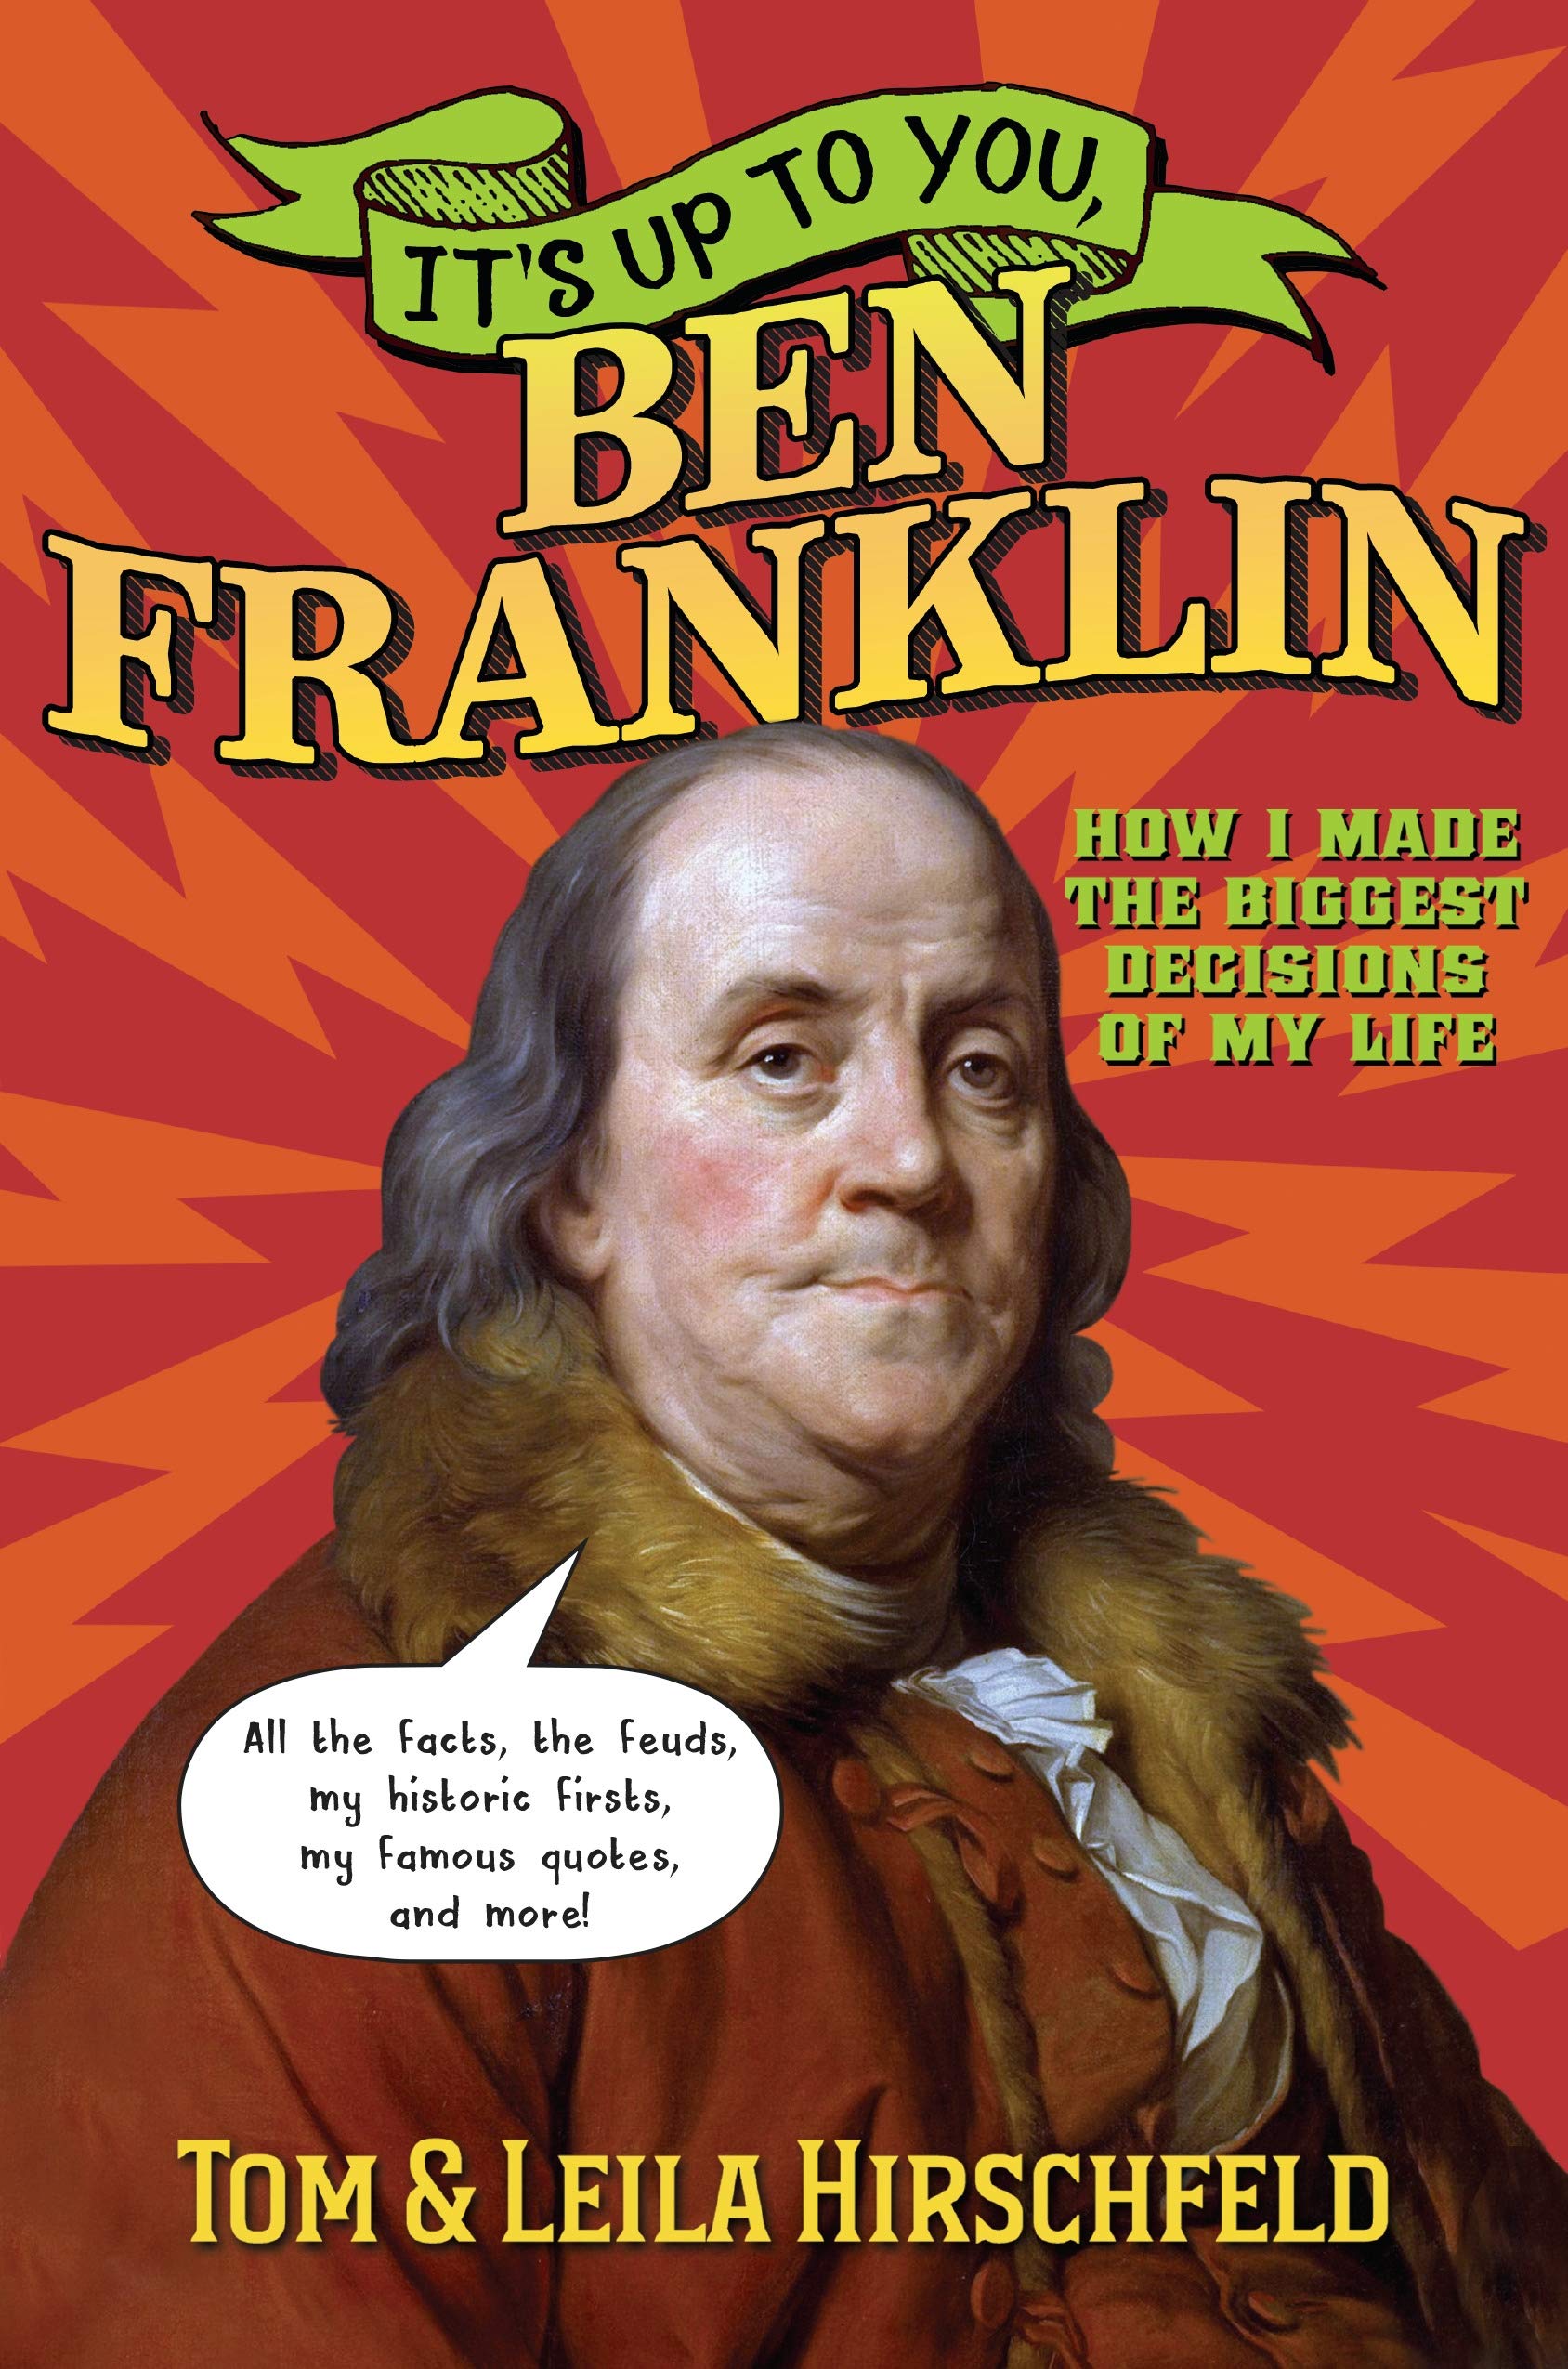 book cover for It's Up to you Ben Franklin